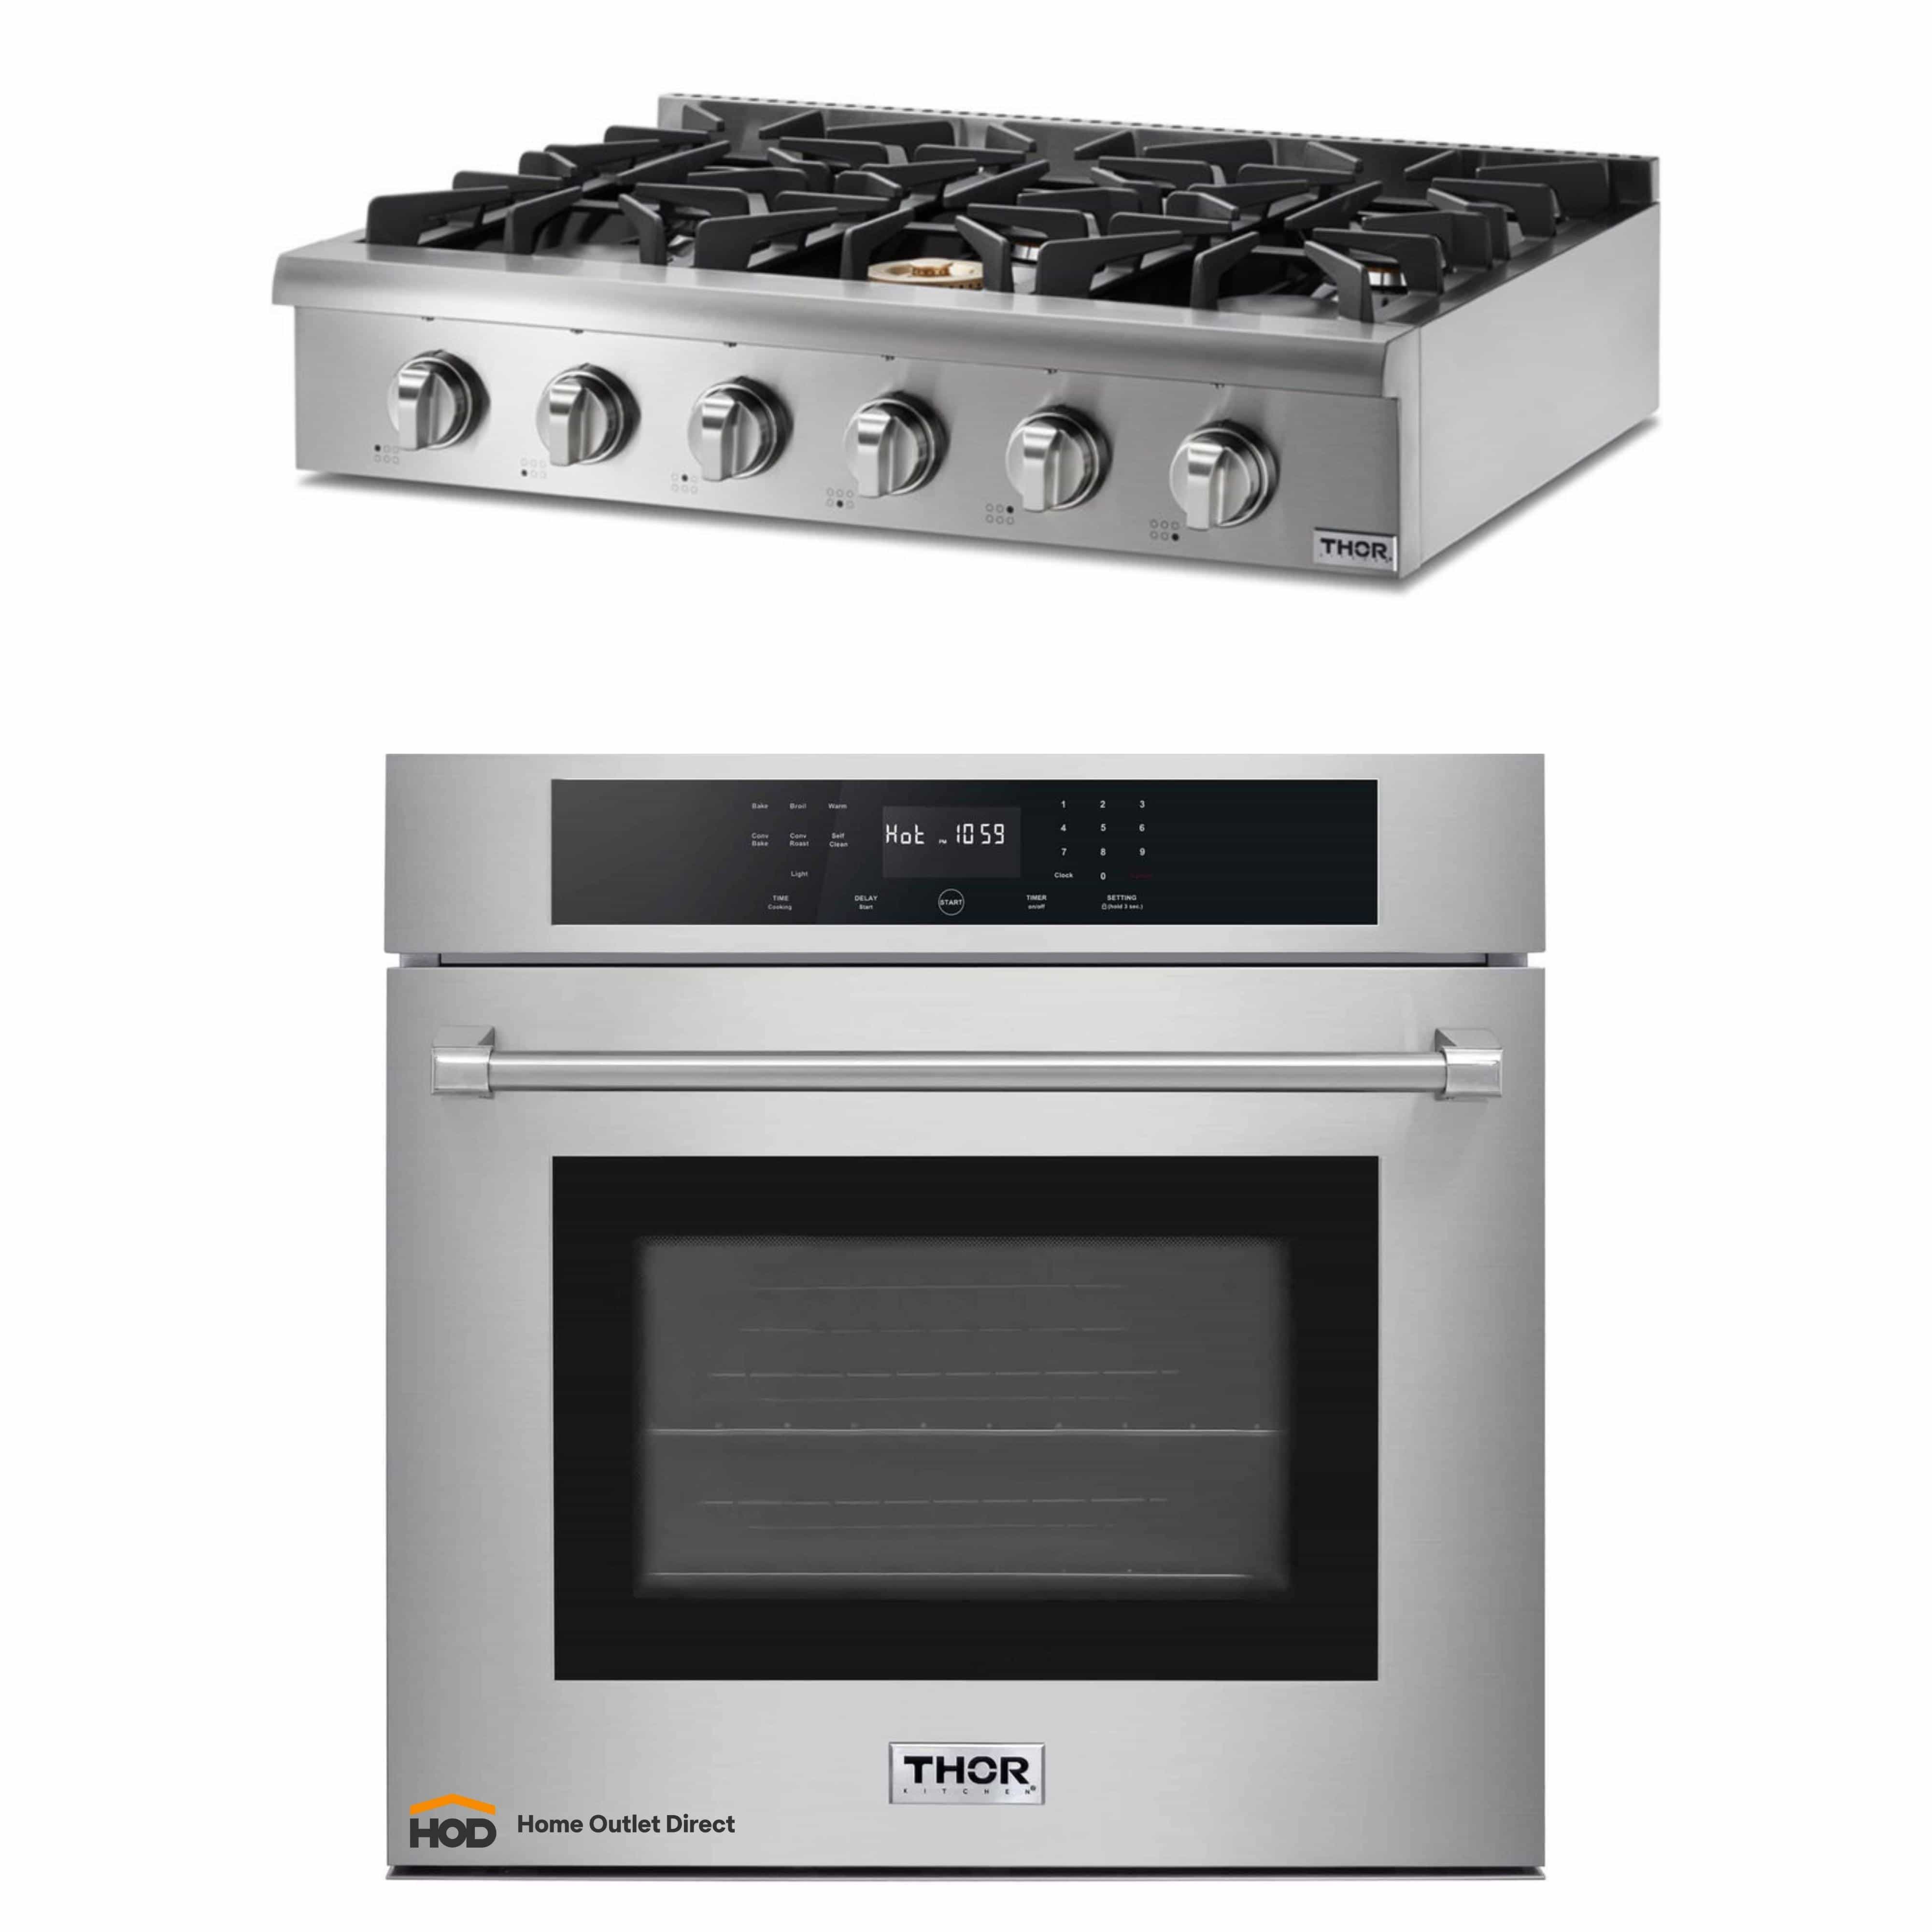 36 Inch Professional Electric Cooktop - THOR Kitchen